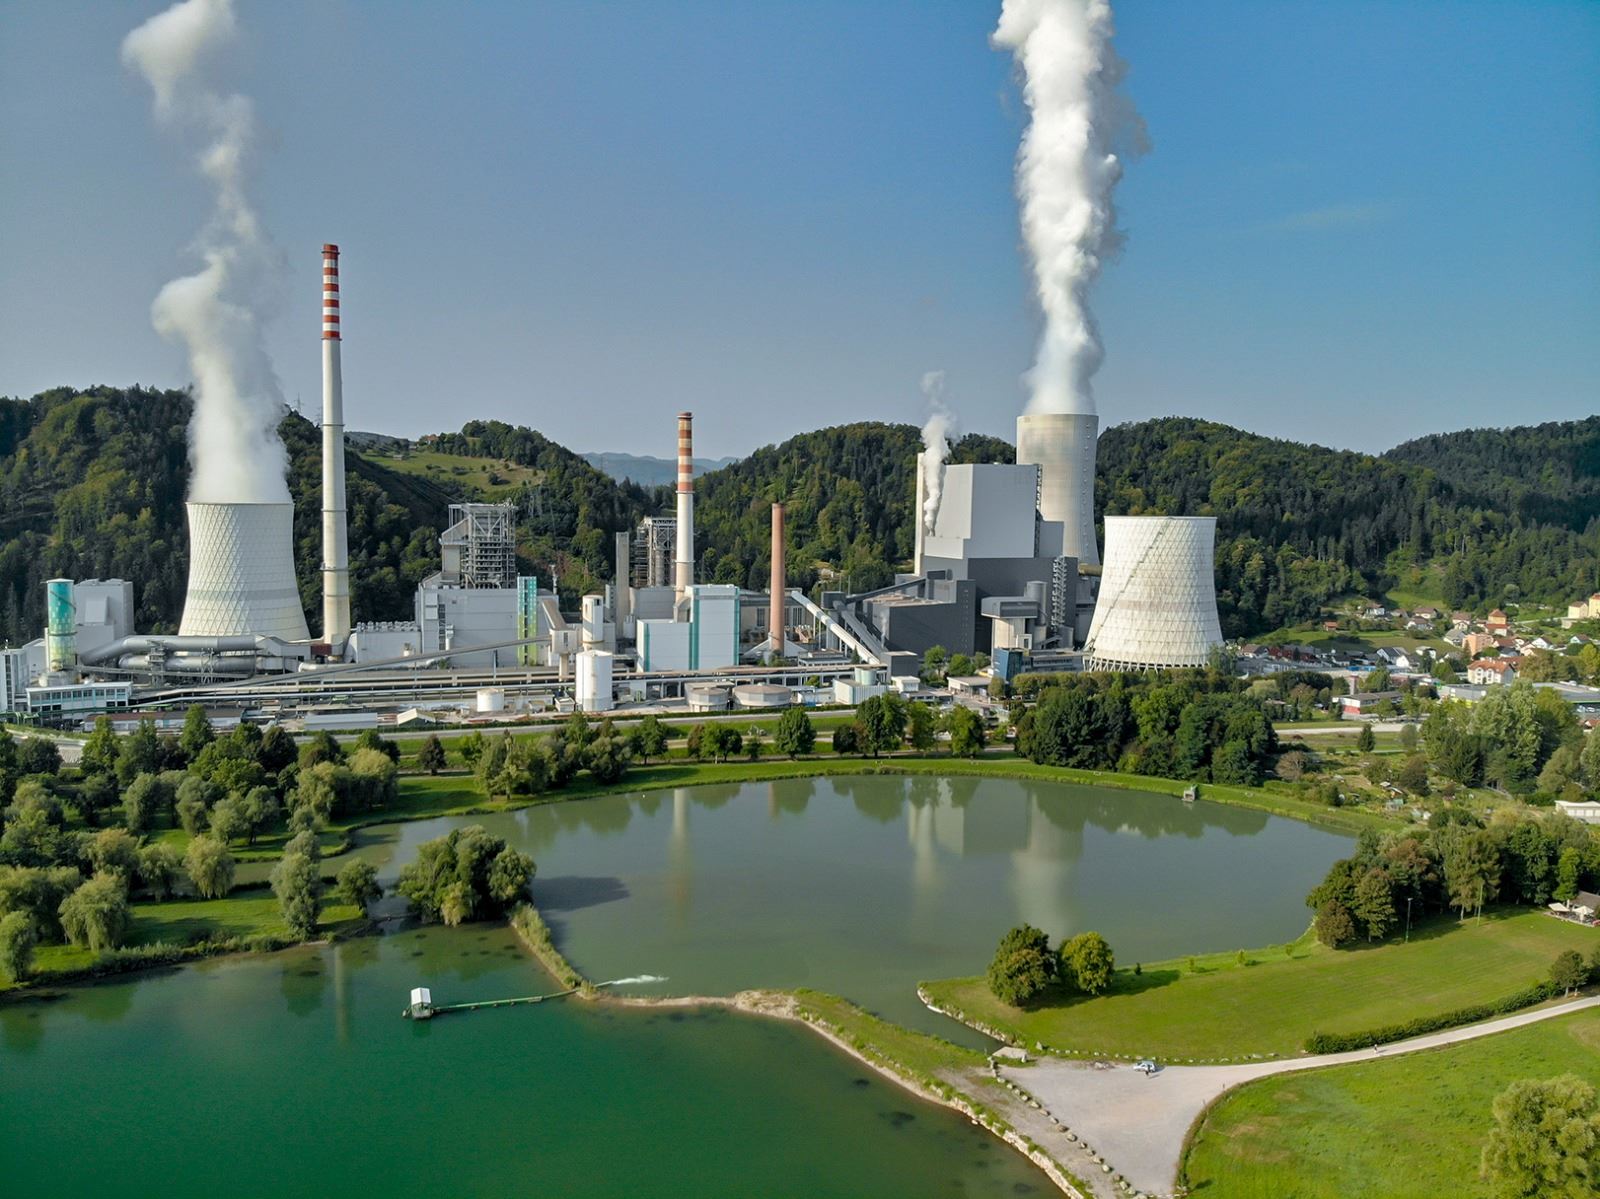 Slovenia planning to divest TEŠ coal station from the state ownership